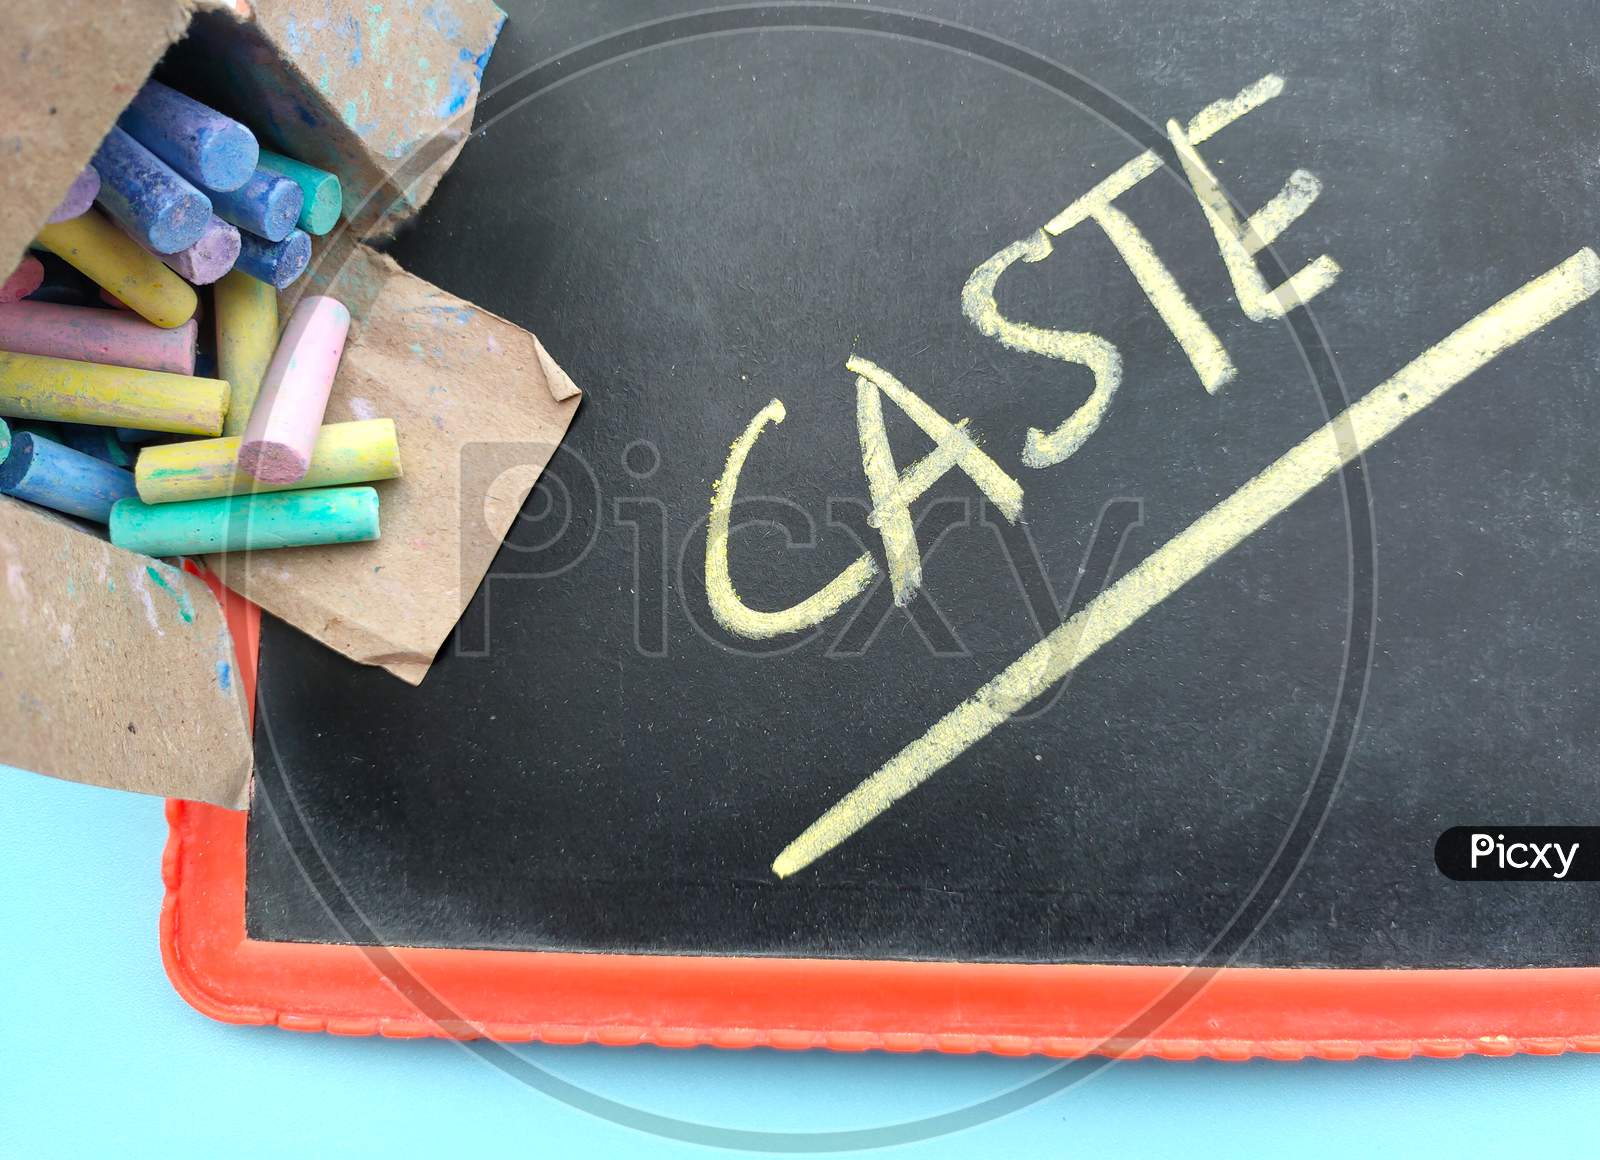 Colorful Chalk In The Box And Slate On The Table And Caste Written On It.